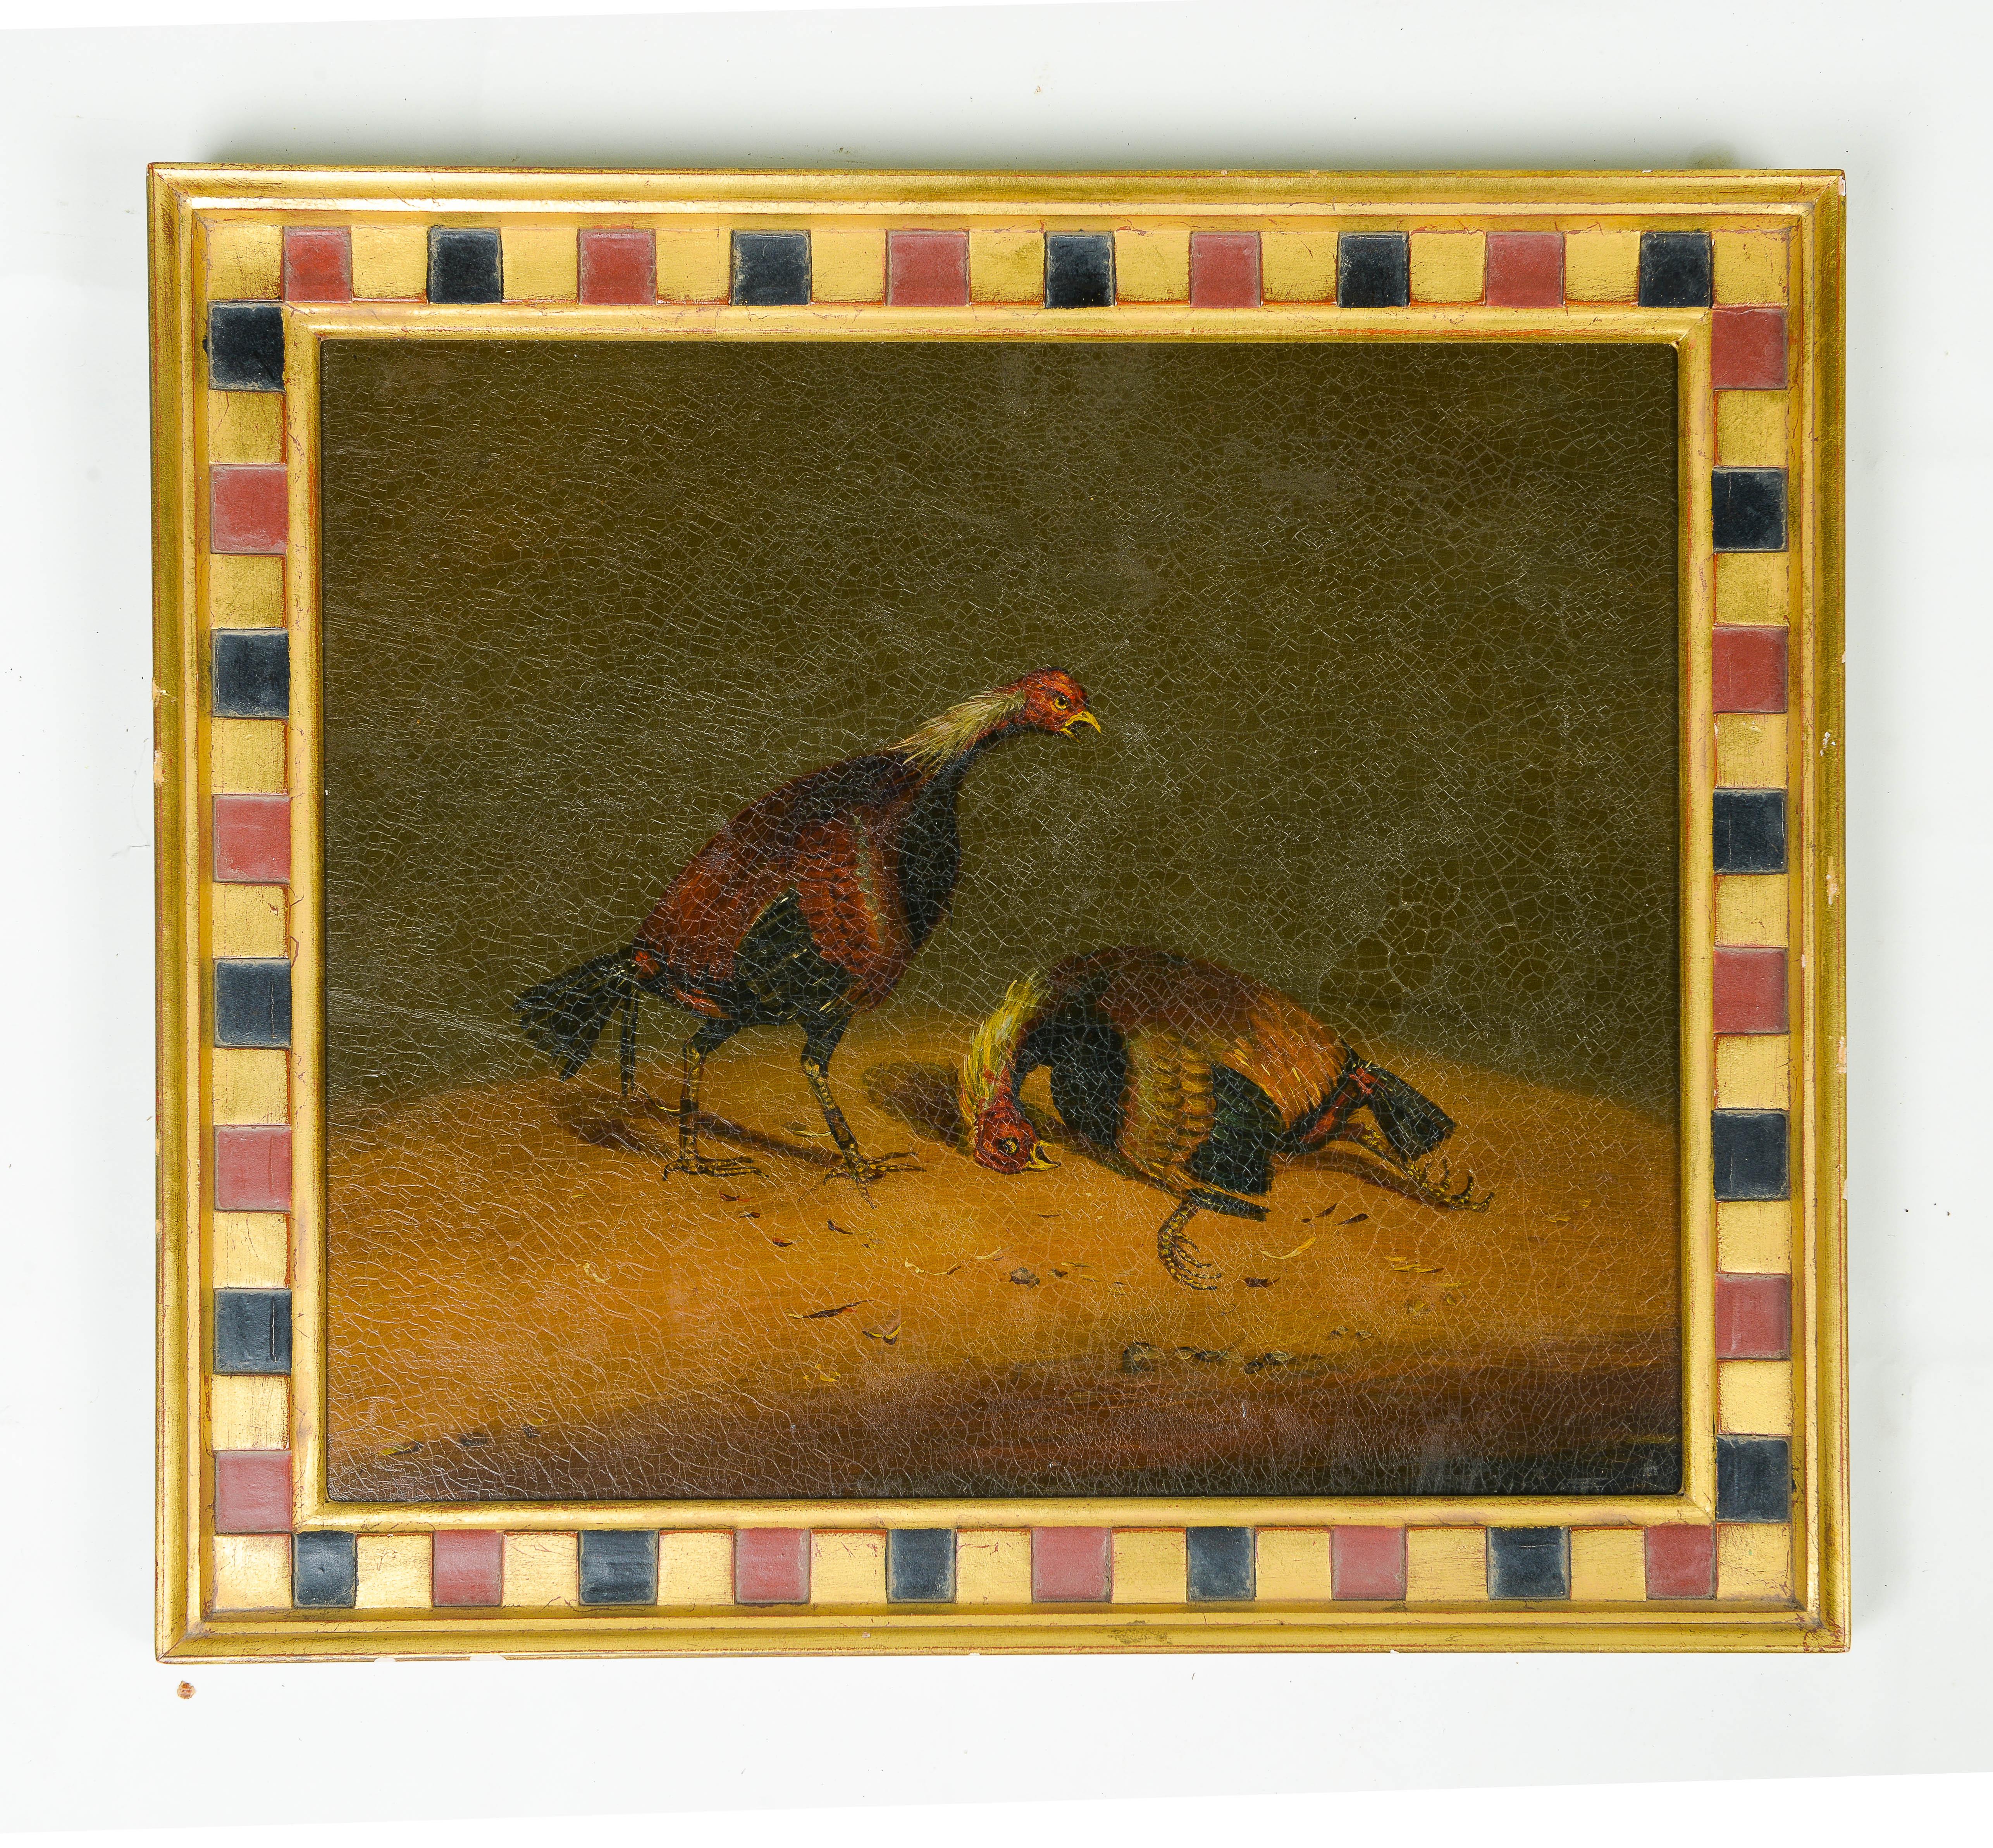 Each depicting two roosters in different stages of a cock fight. Taken after 19th century English paintings by artists such as Henry Thomas Alken and Frances Turner. Set within very attractive carved gilt and polychrome frames.